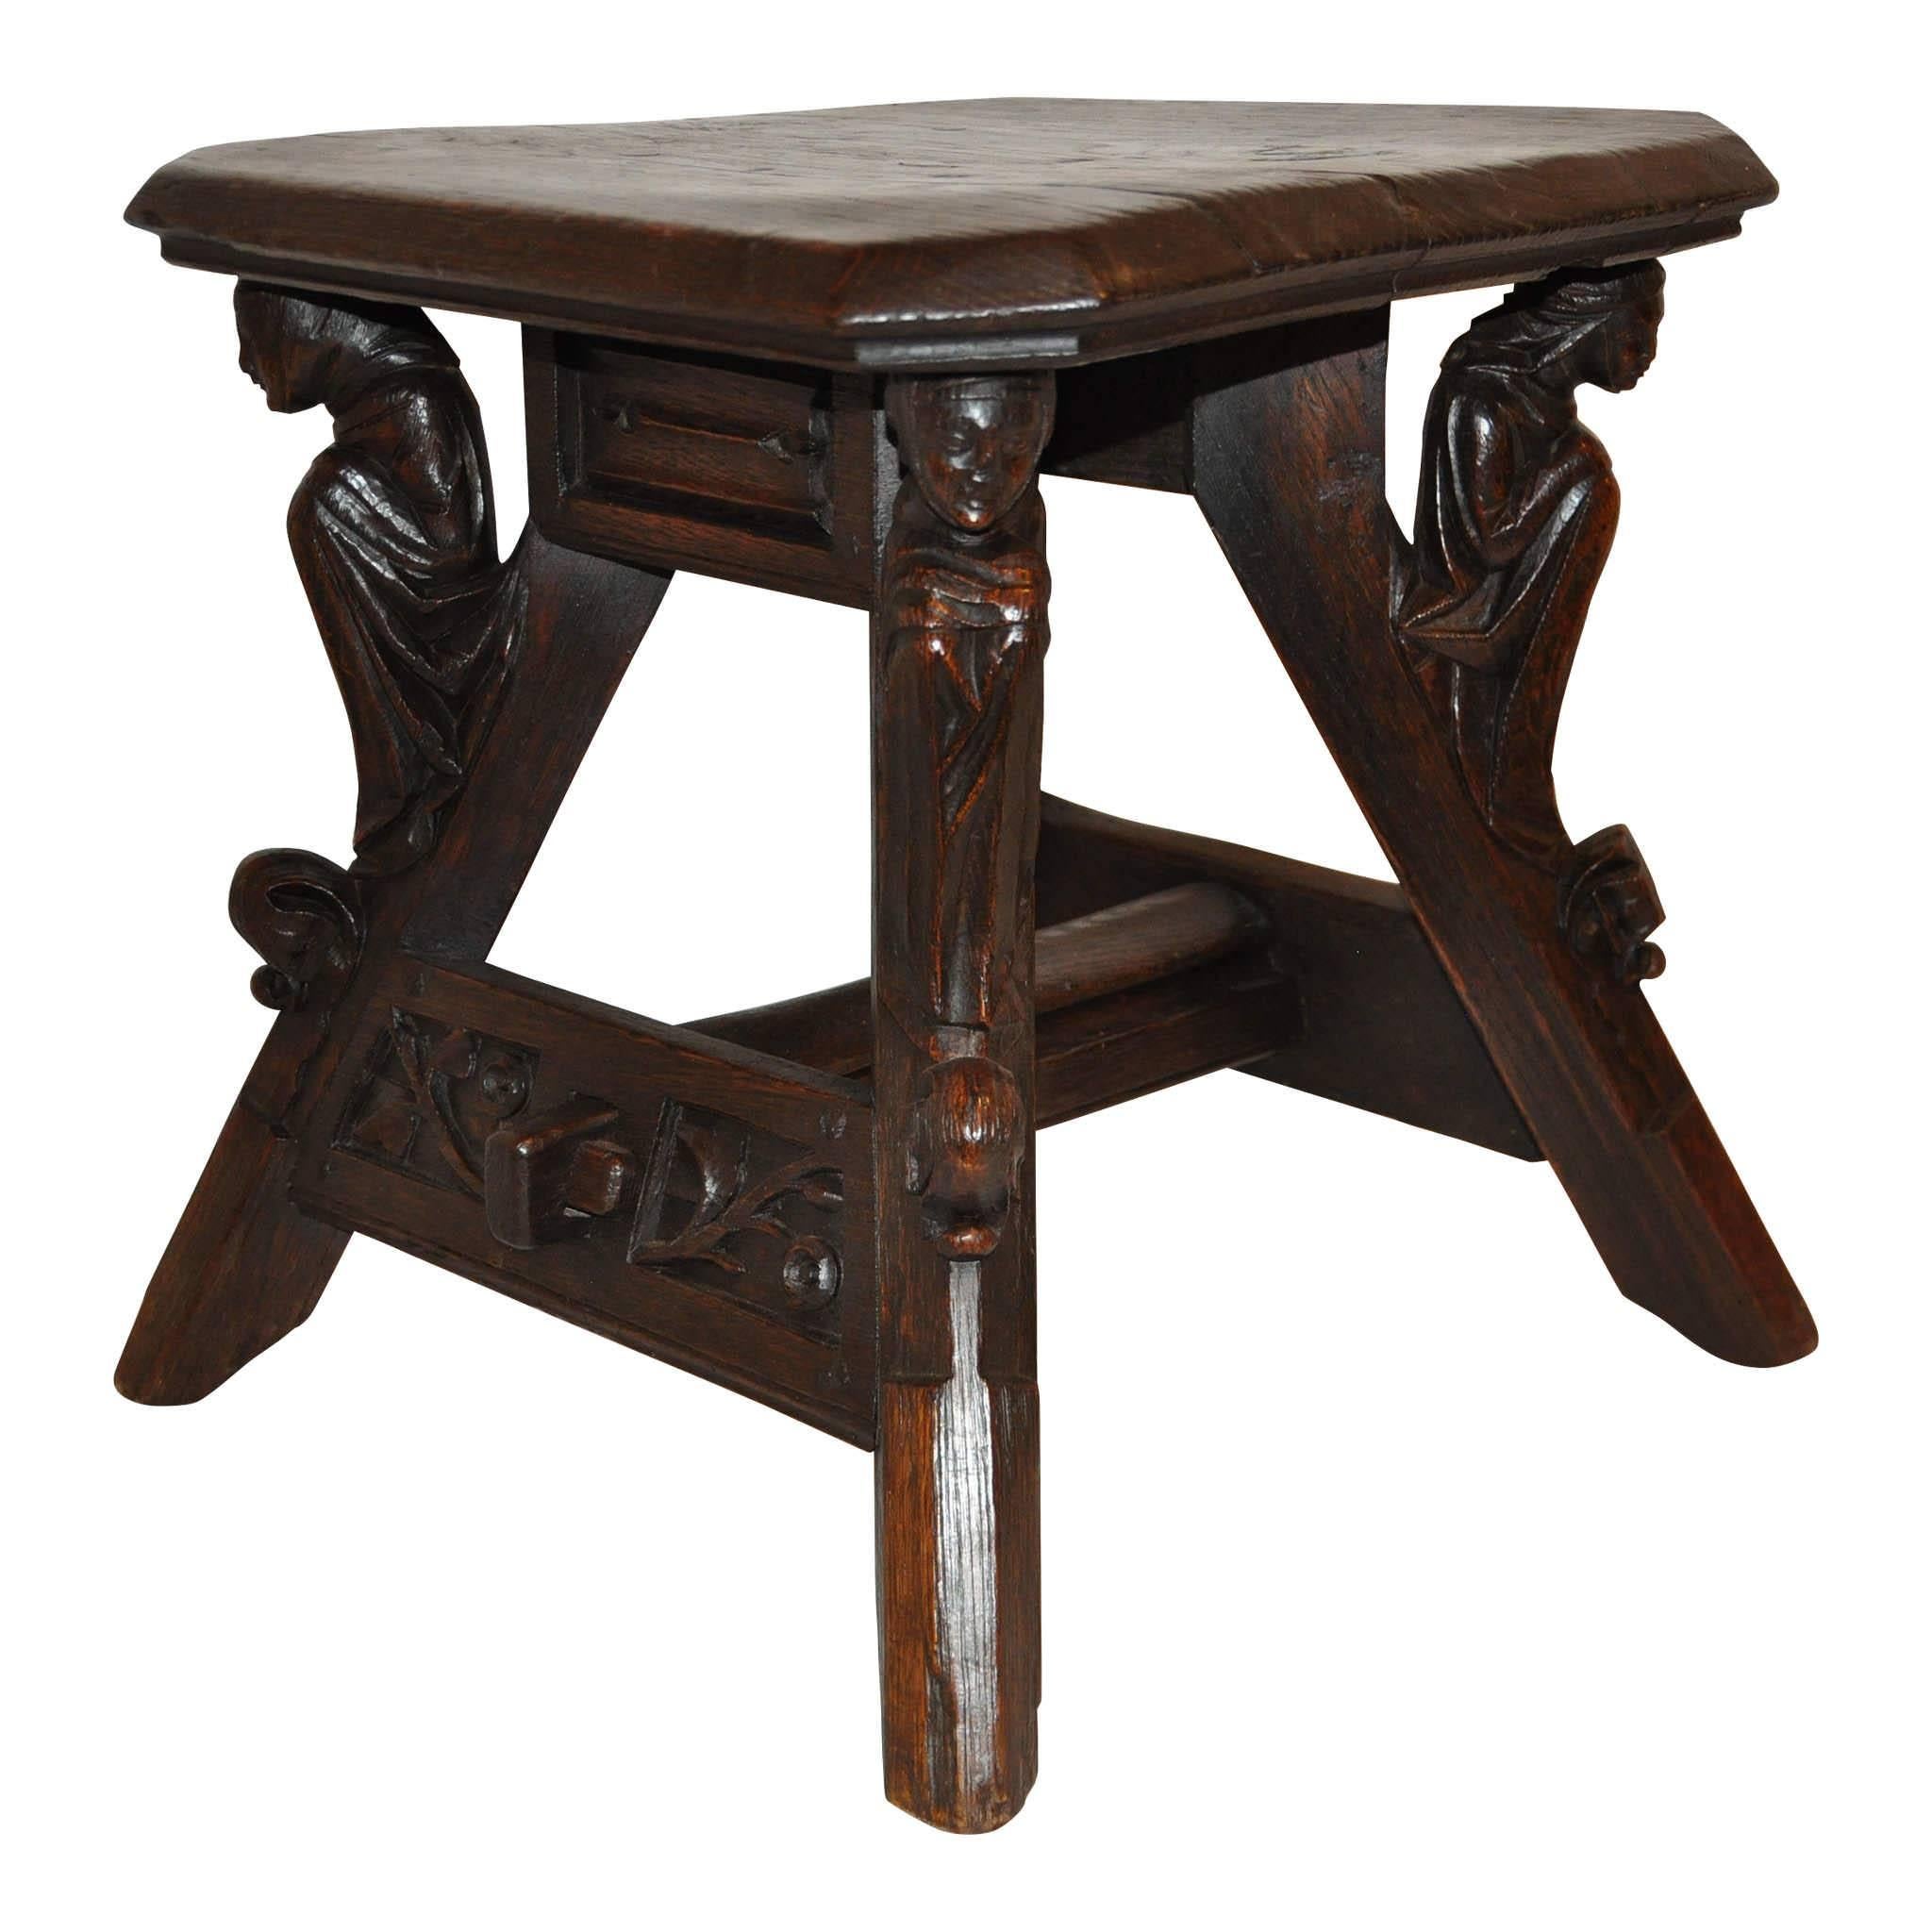 Belgian Gothic Revival Bench, Side Table, circa 1840